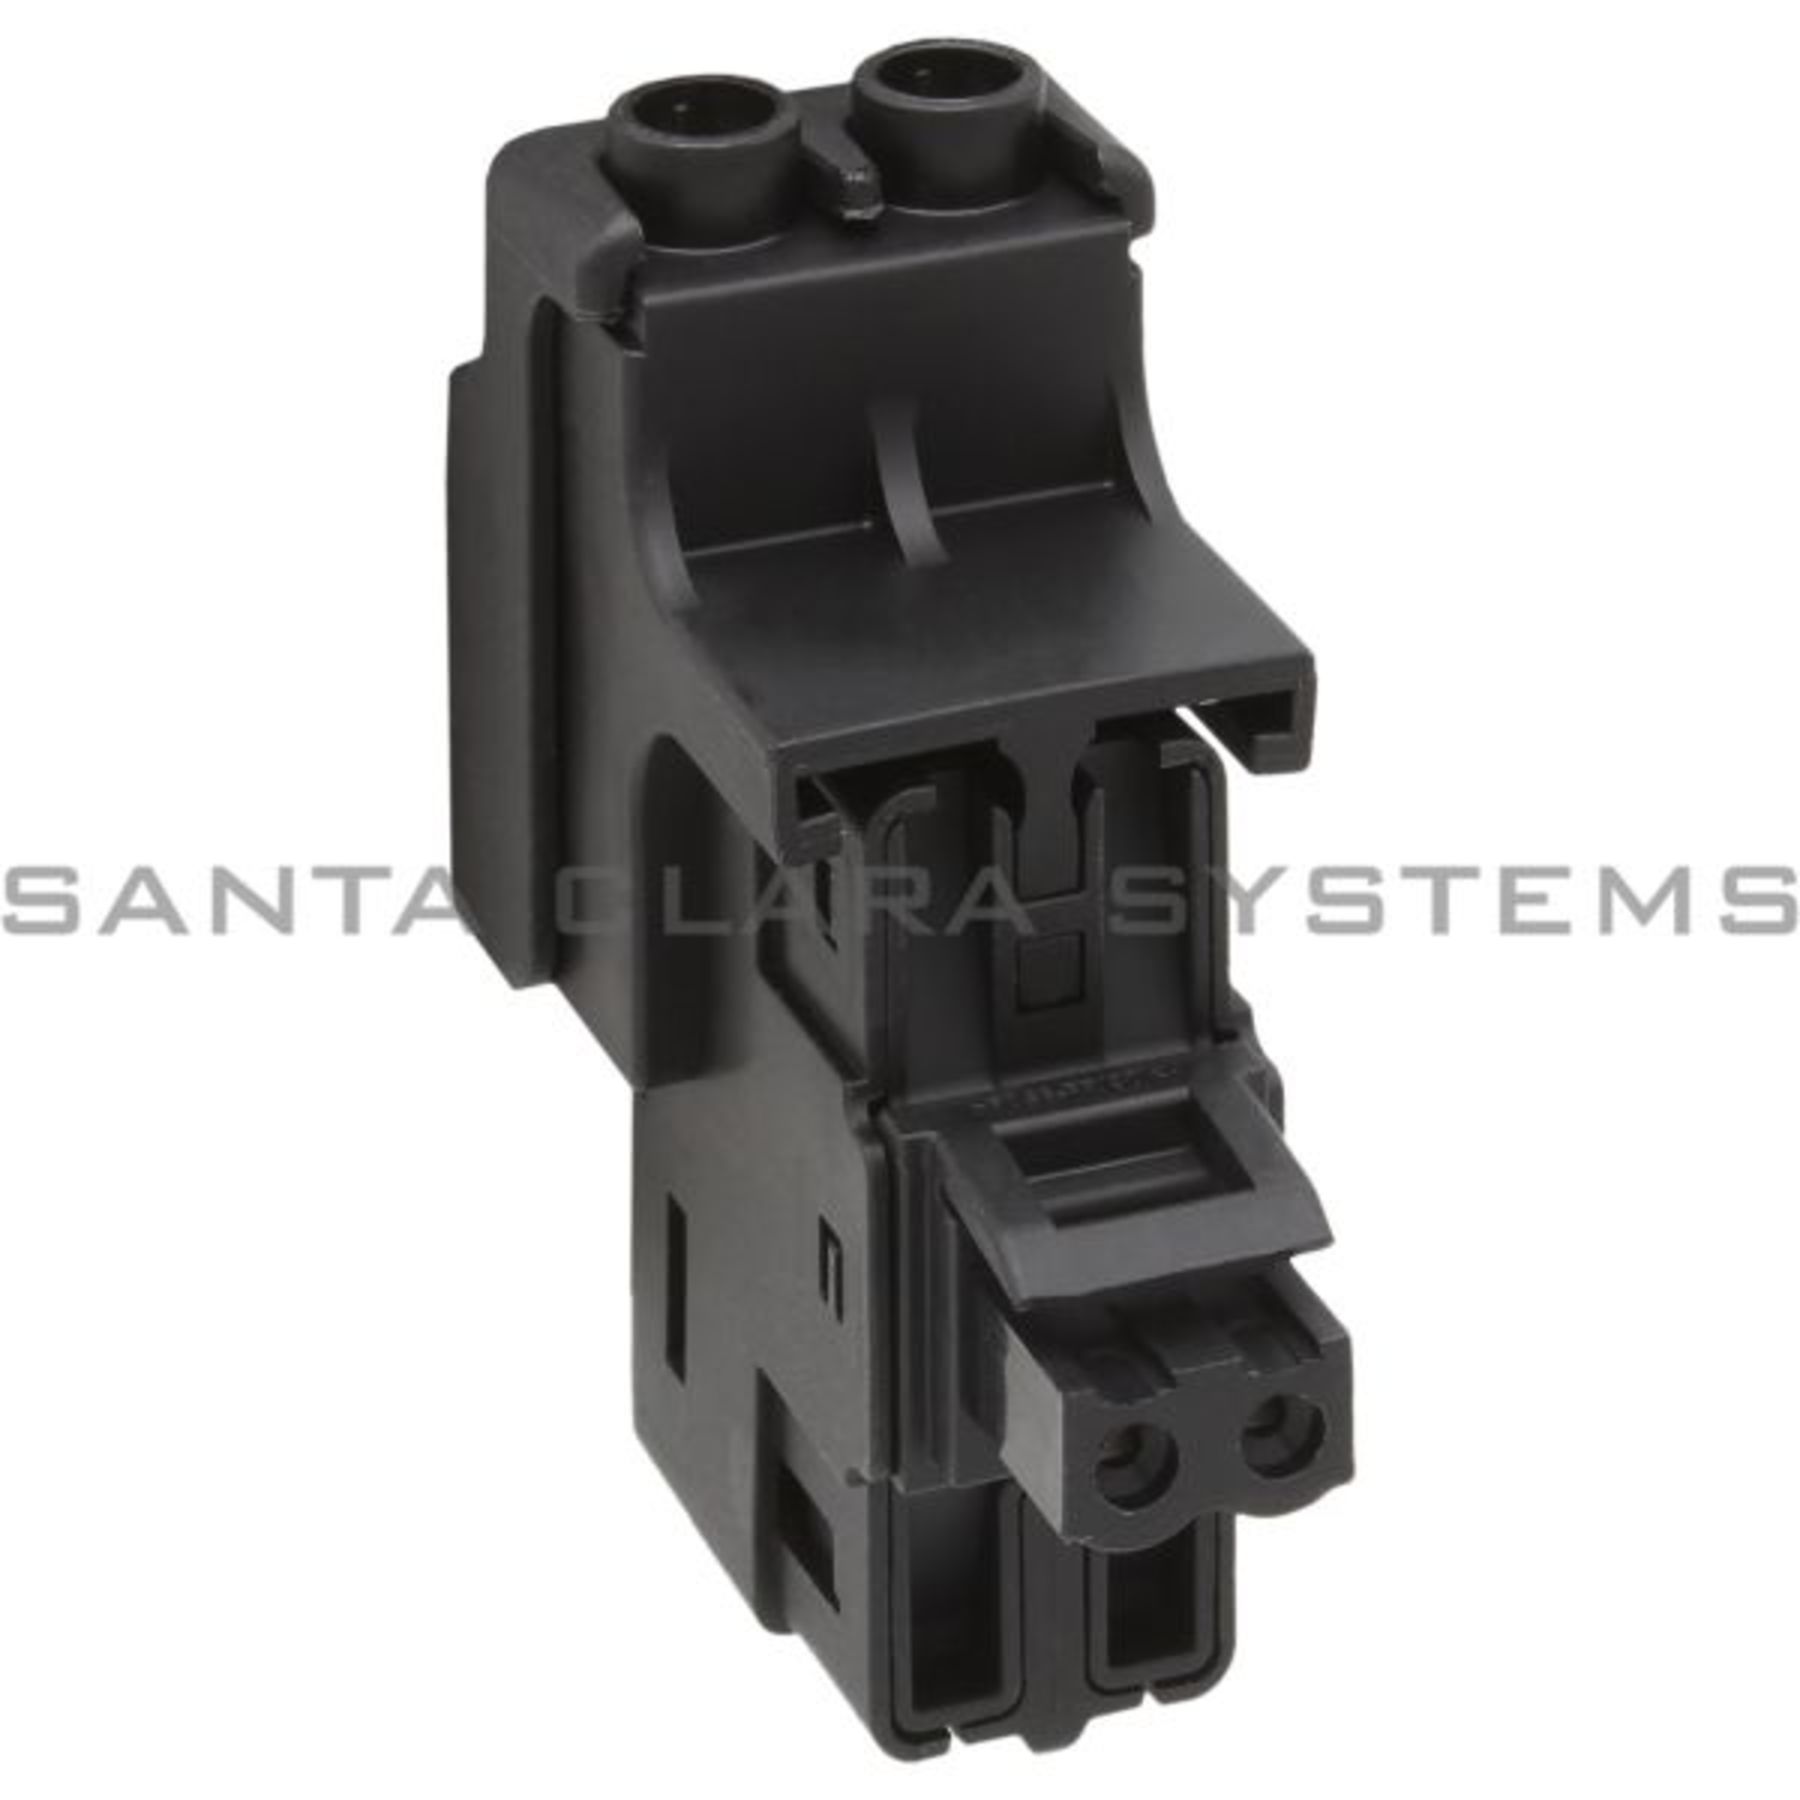 Rockwell Automation 2198-H070-DP-T Shared Bus Connector Kit, For